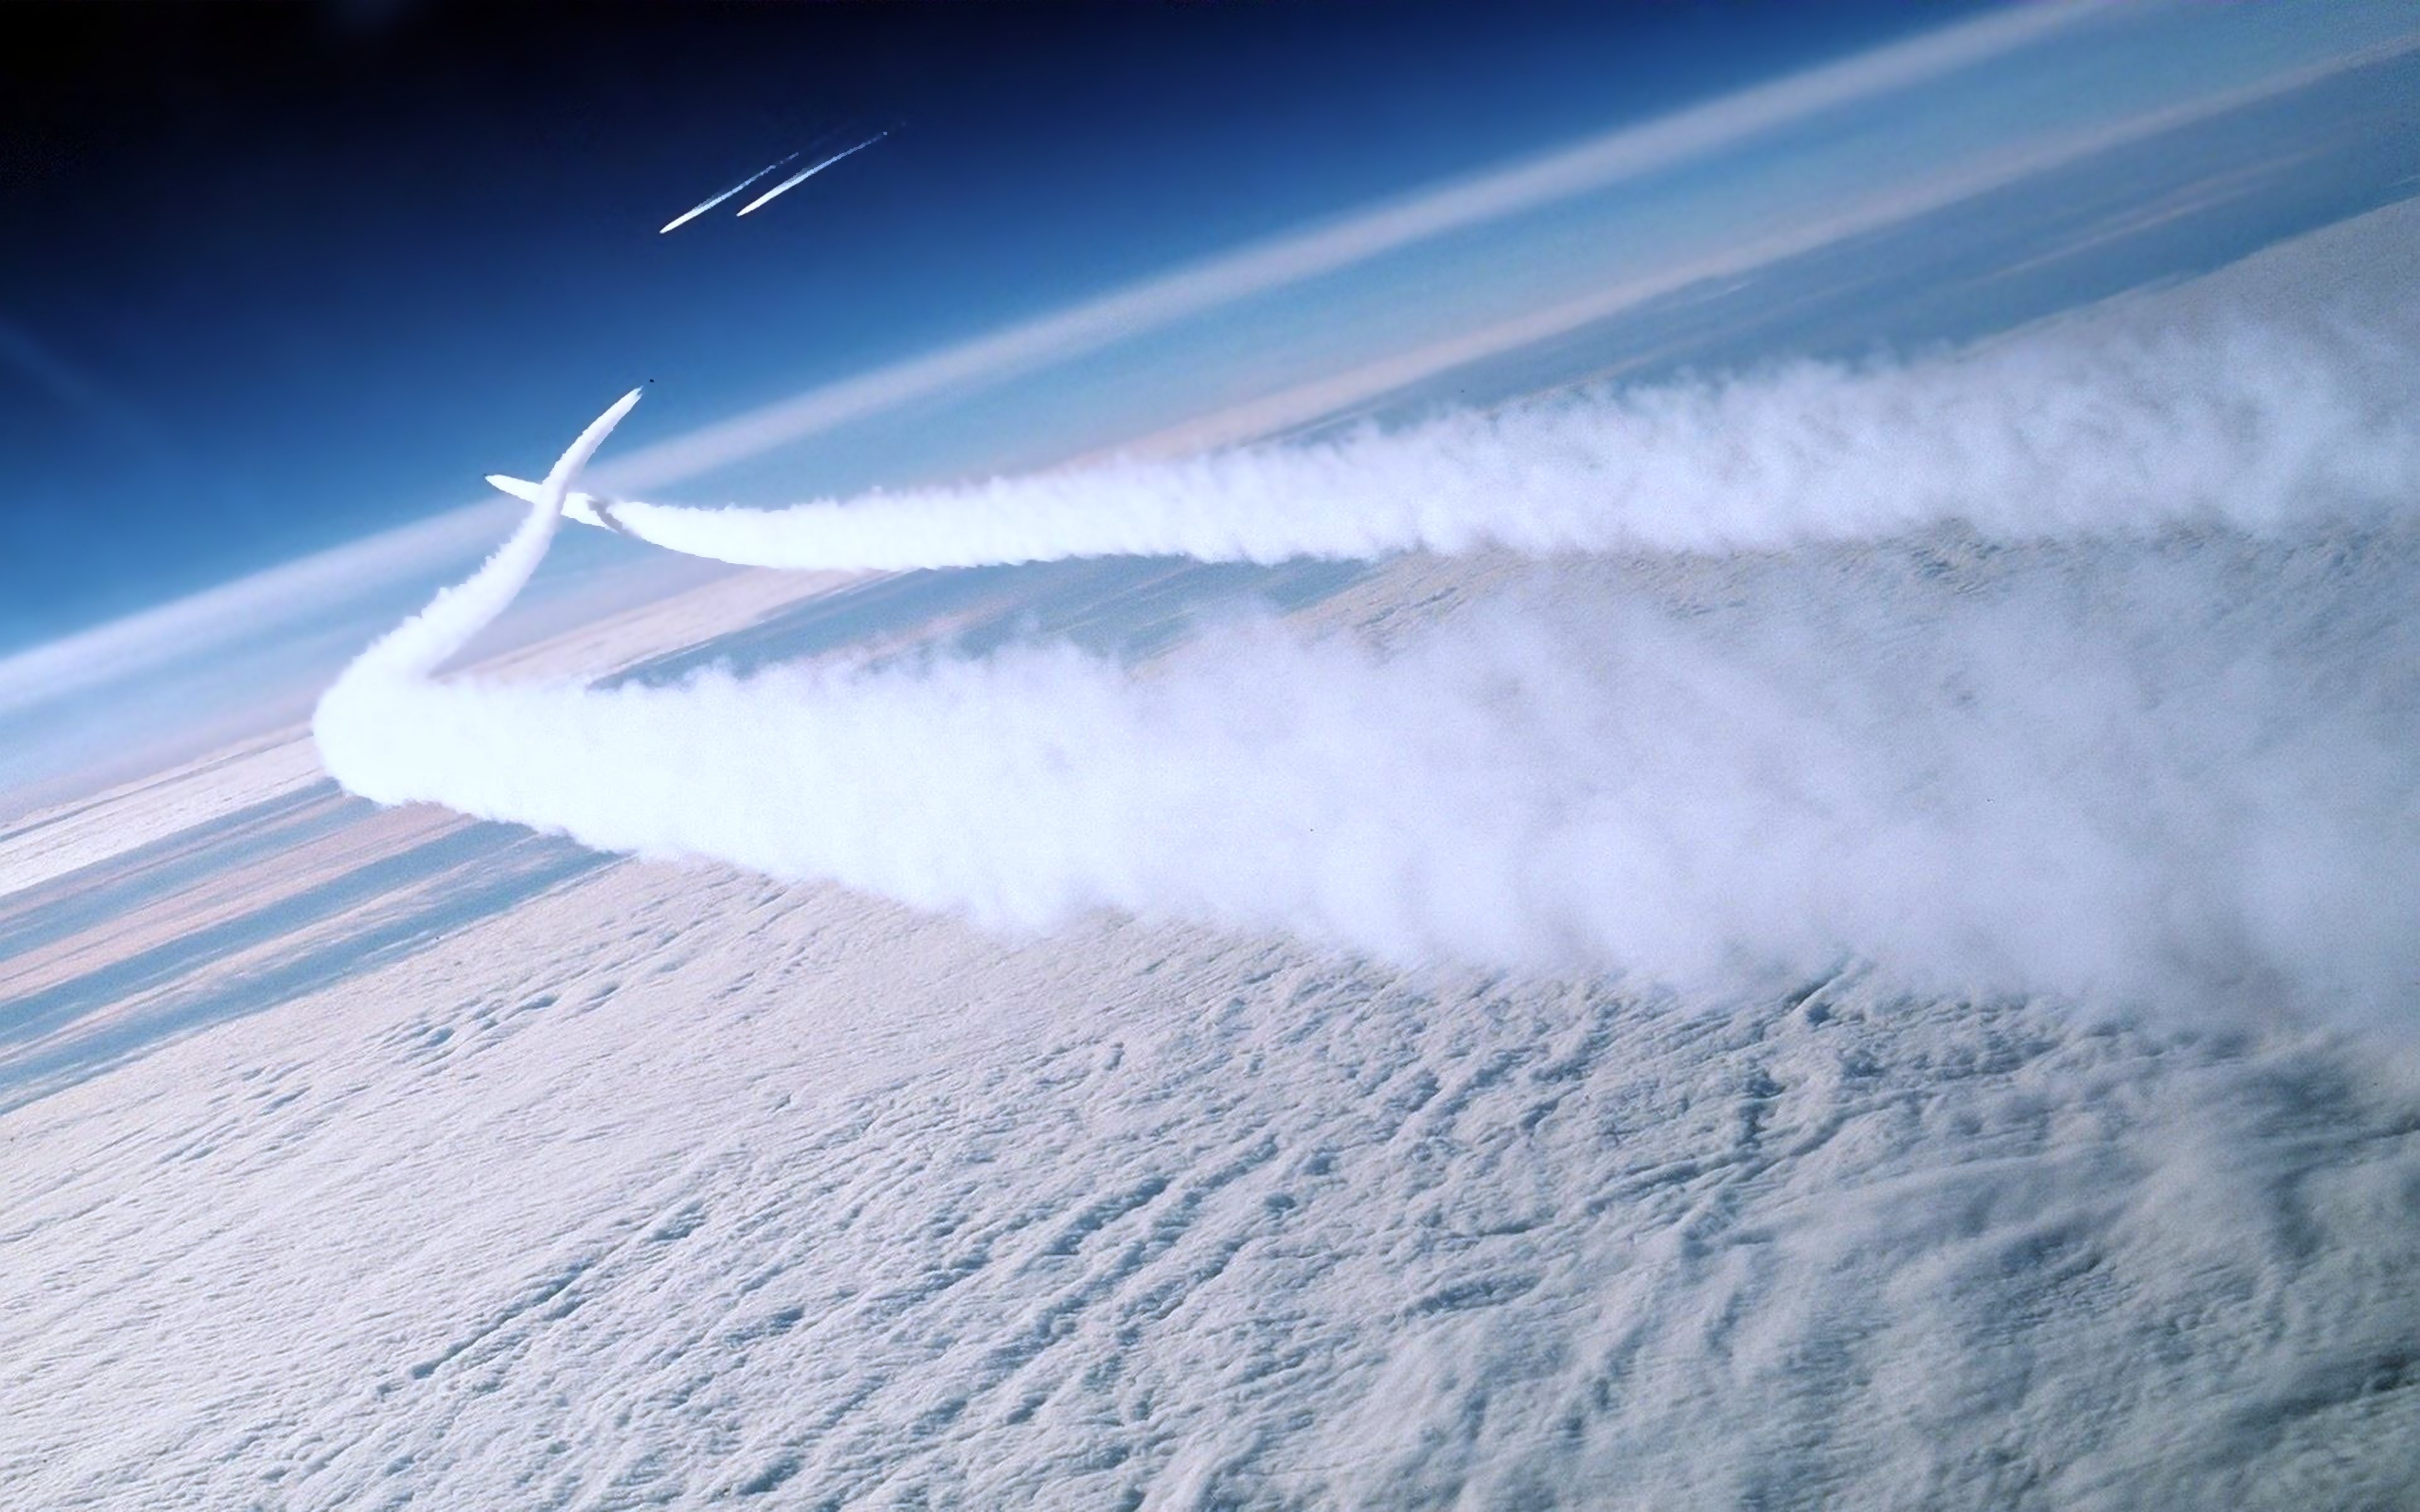 aircrafts, Attack, Bombing, Clouds, Earth, Flights, Landscapes, Military, Nature, Review, Sky, Warplanes, Smoke Wallpaper